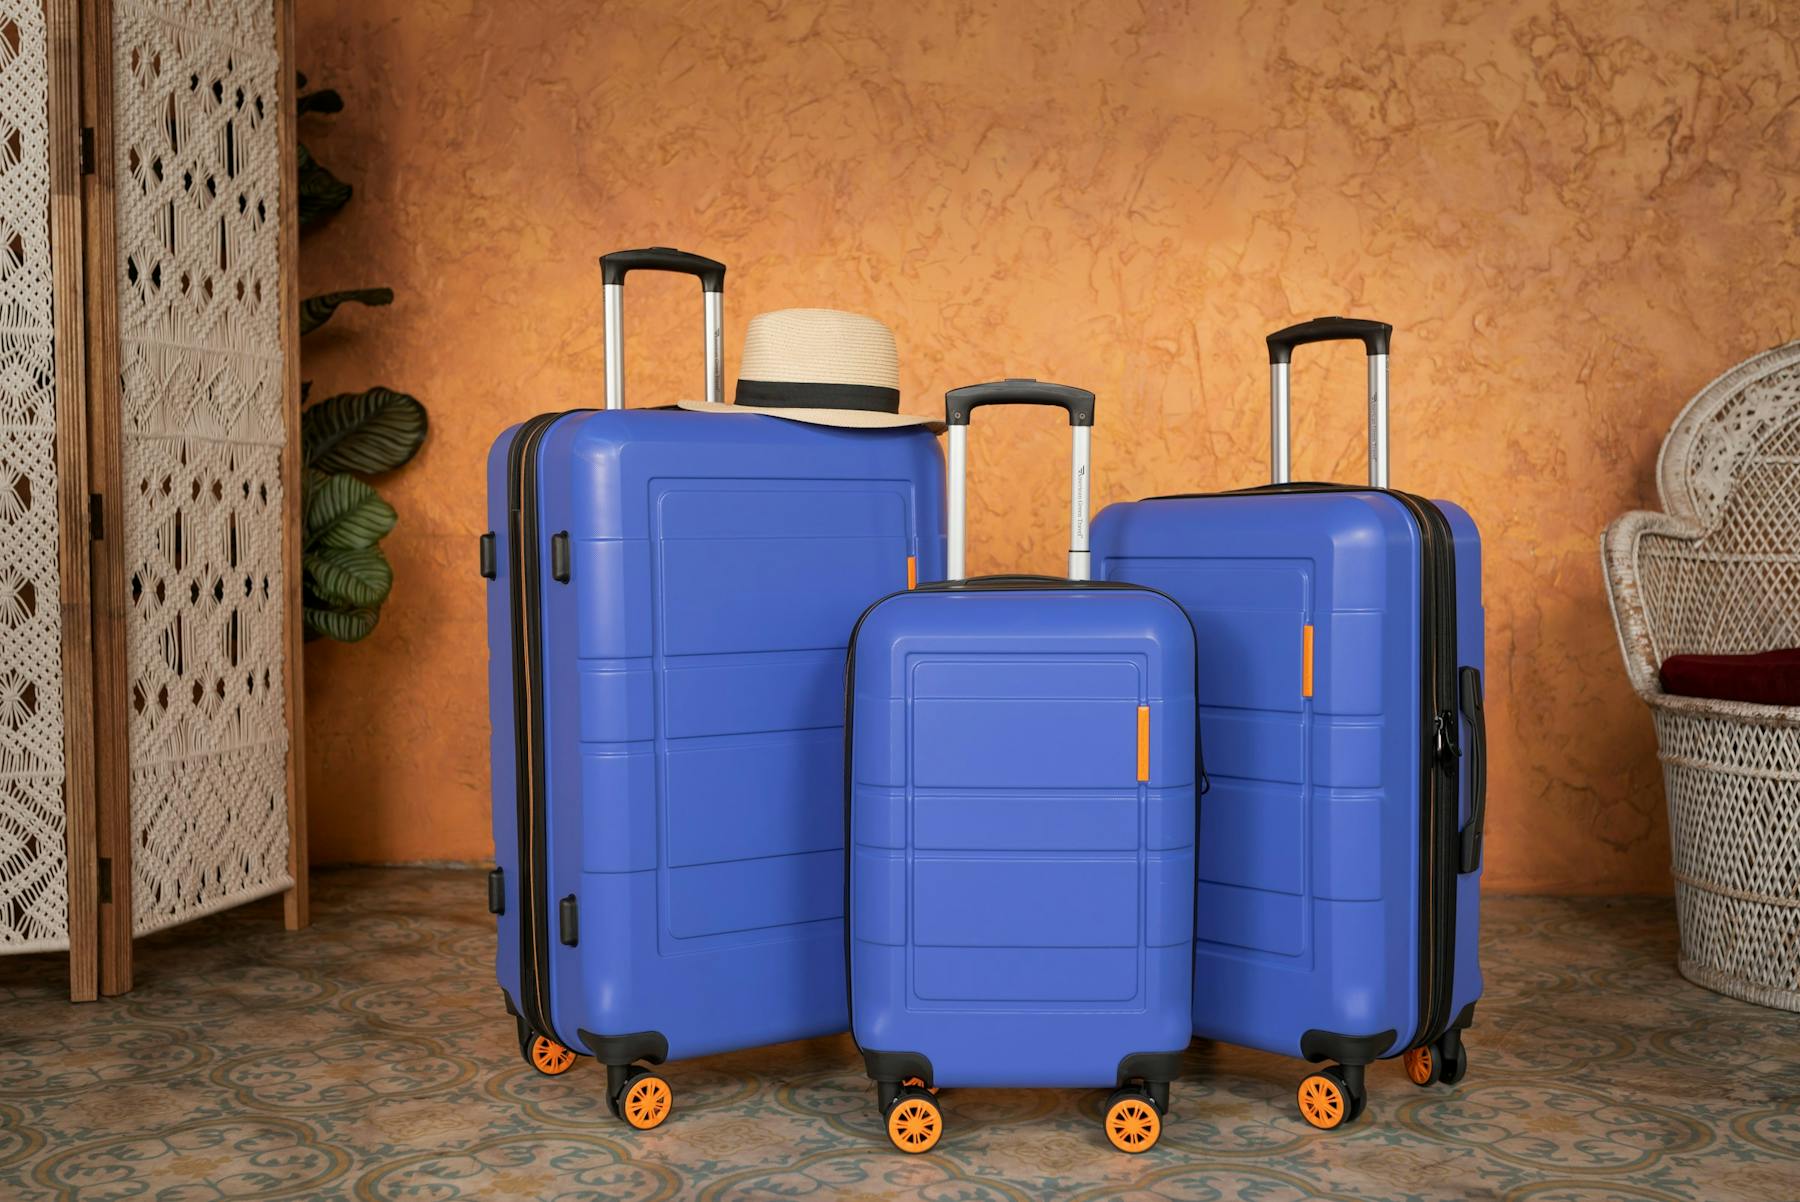 Three pieces of blue luggage sitting next to each other.